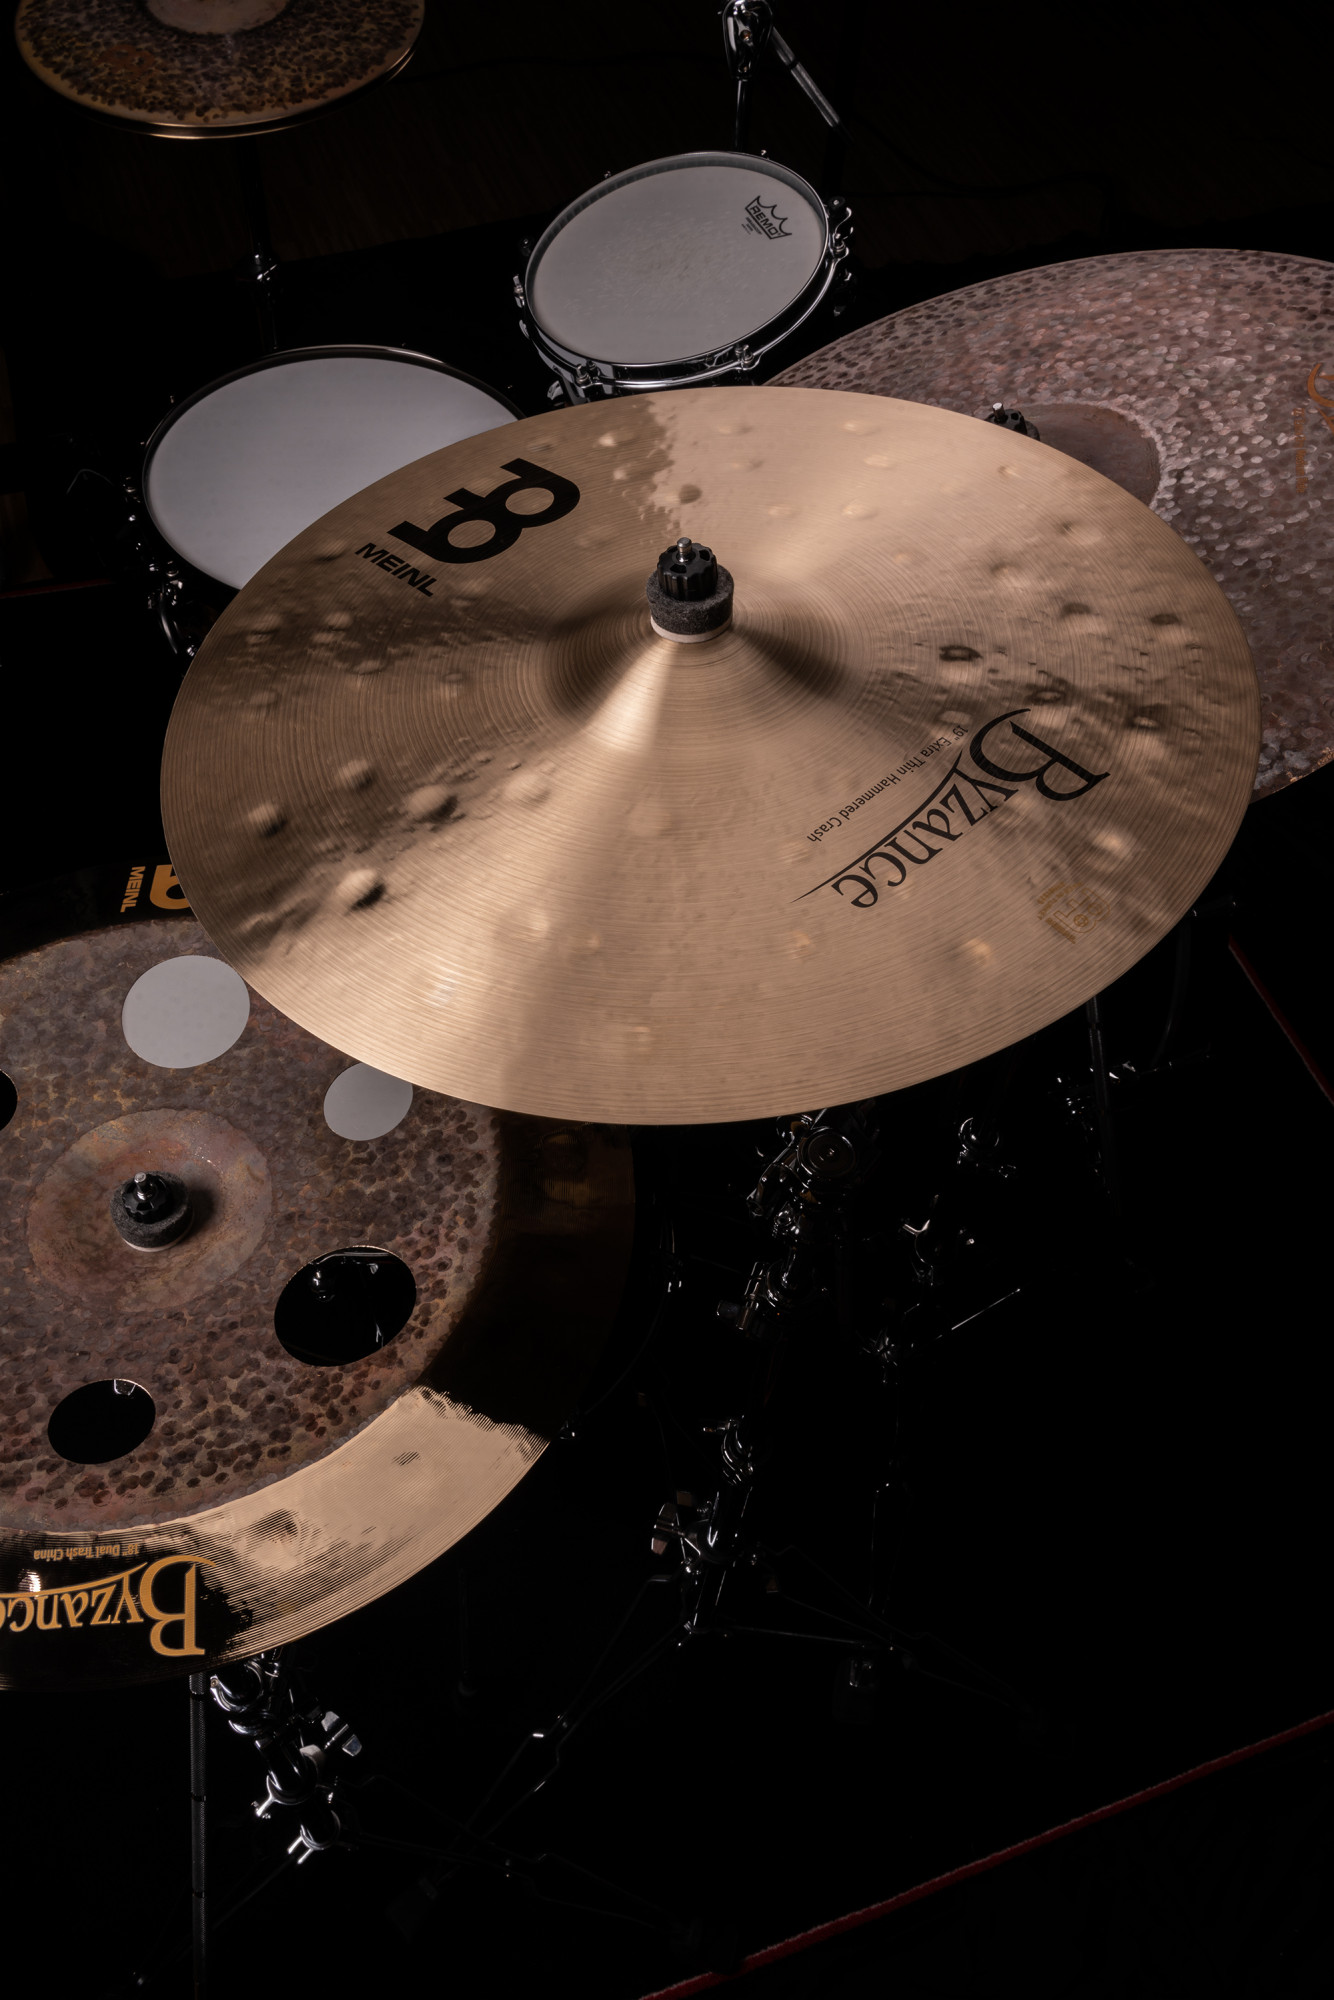 MEINL Cymbals マイネル Byzance Traditional Series クラッシュシンバル 22" Extra Thin